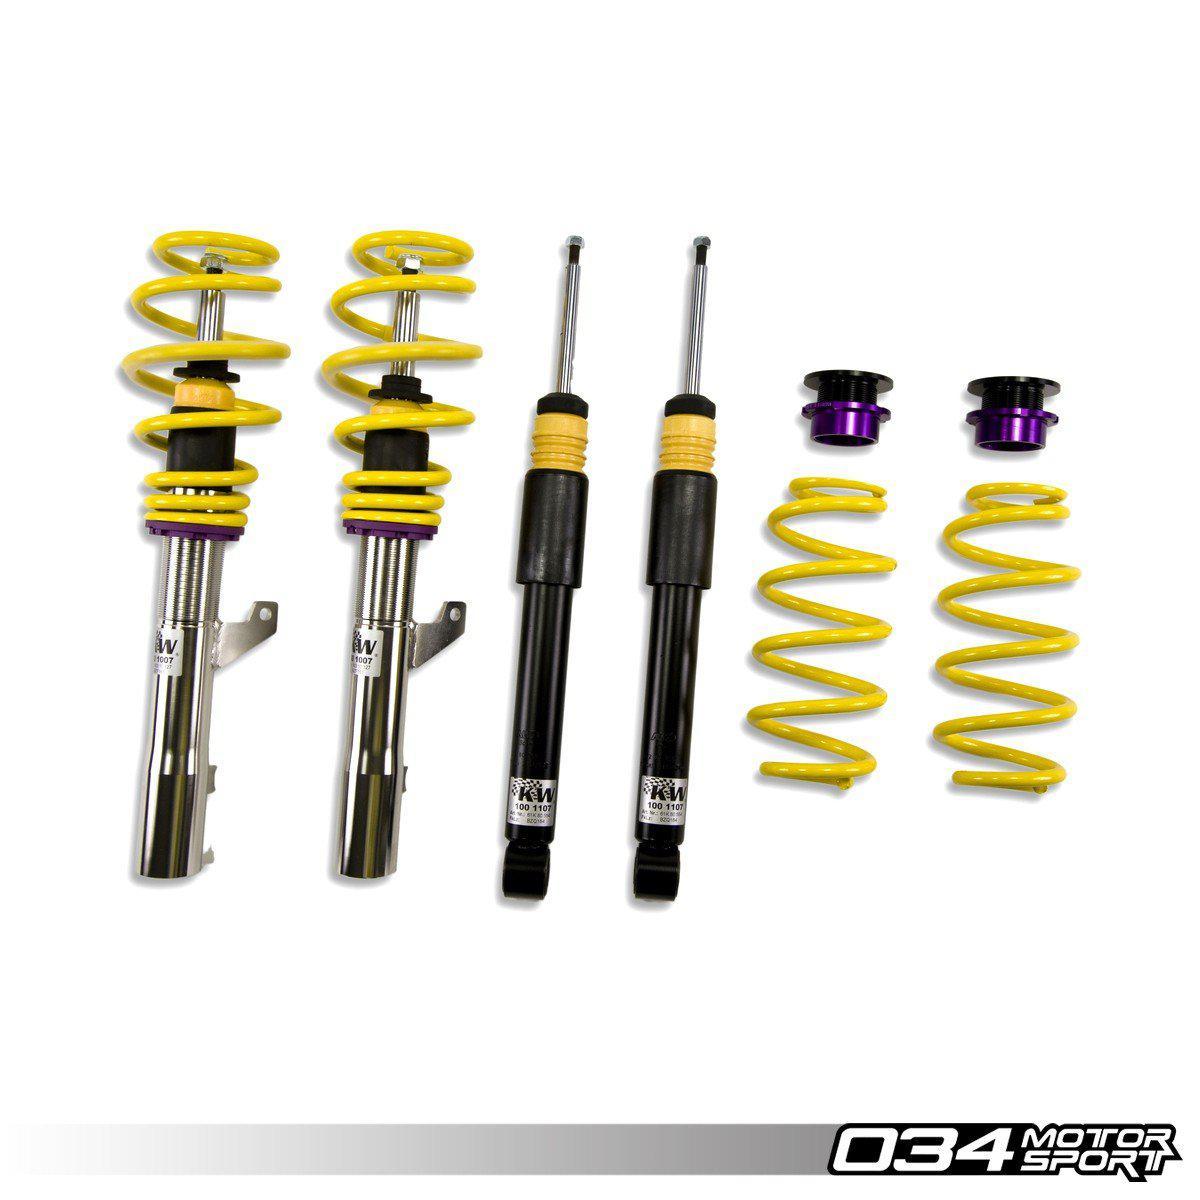 KW Variant 3 Coilover Suspension, Audi R8 V10 5.2l Fsi Without Magnetic Ride-A Little Tuning Co